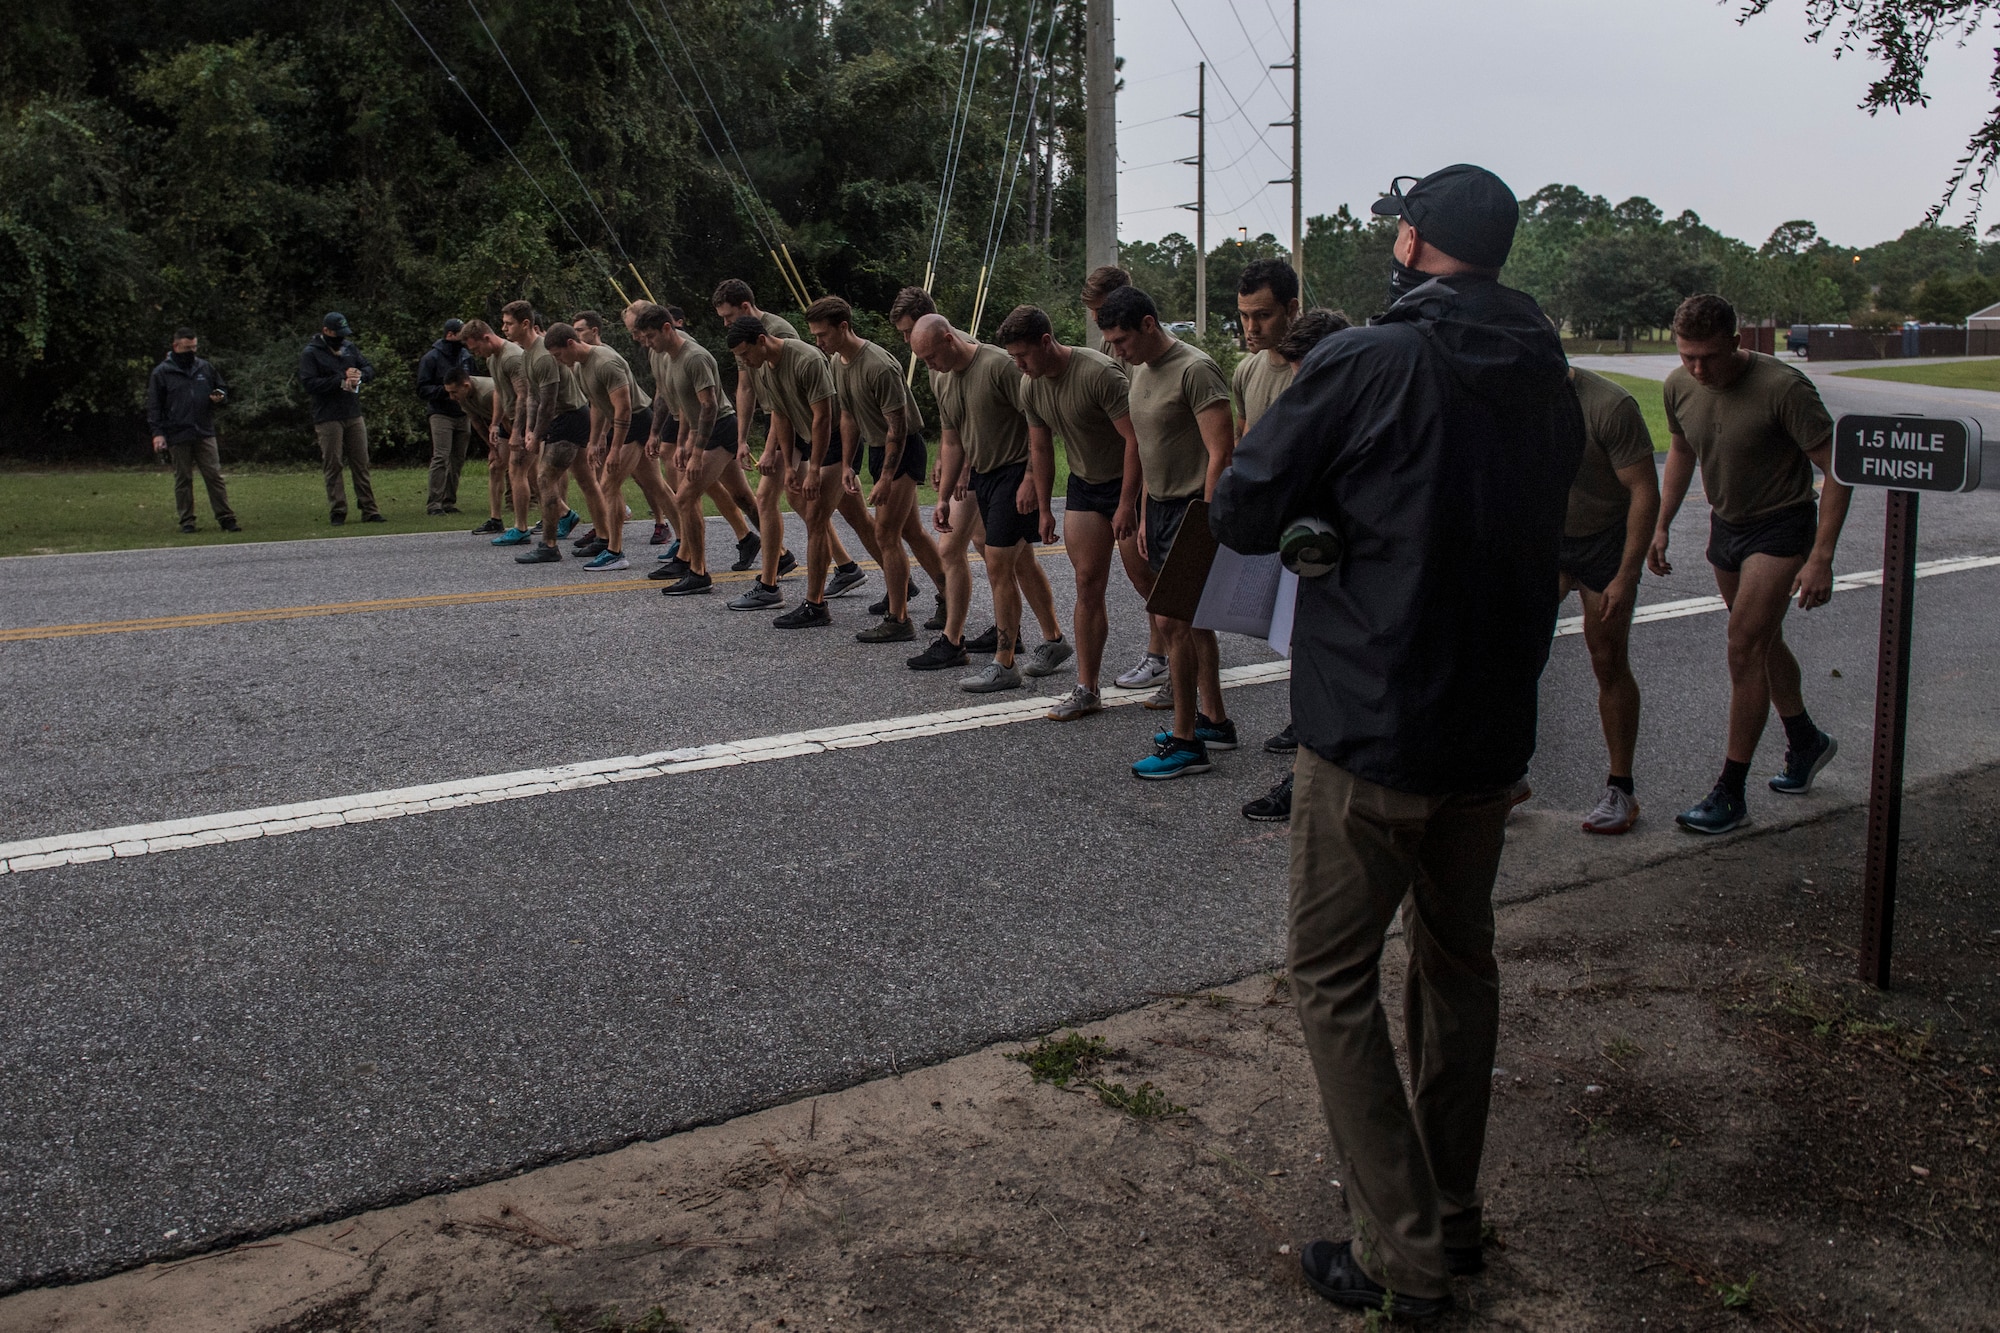 Special Tactics tactical air control party candidates are lined up in a row across a road at the start of a running test. They lean forward ready for the start.